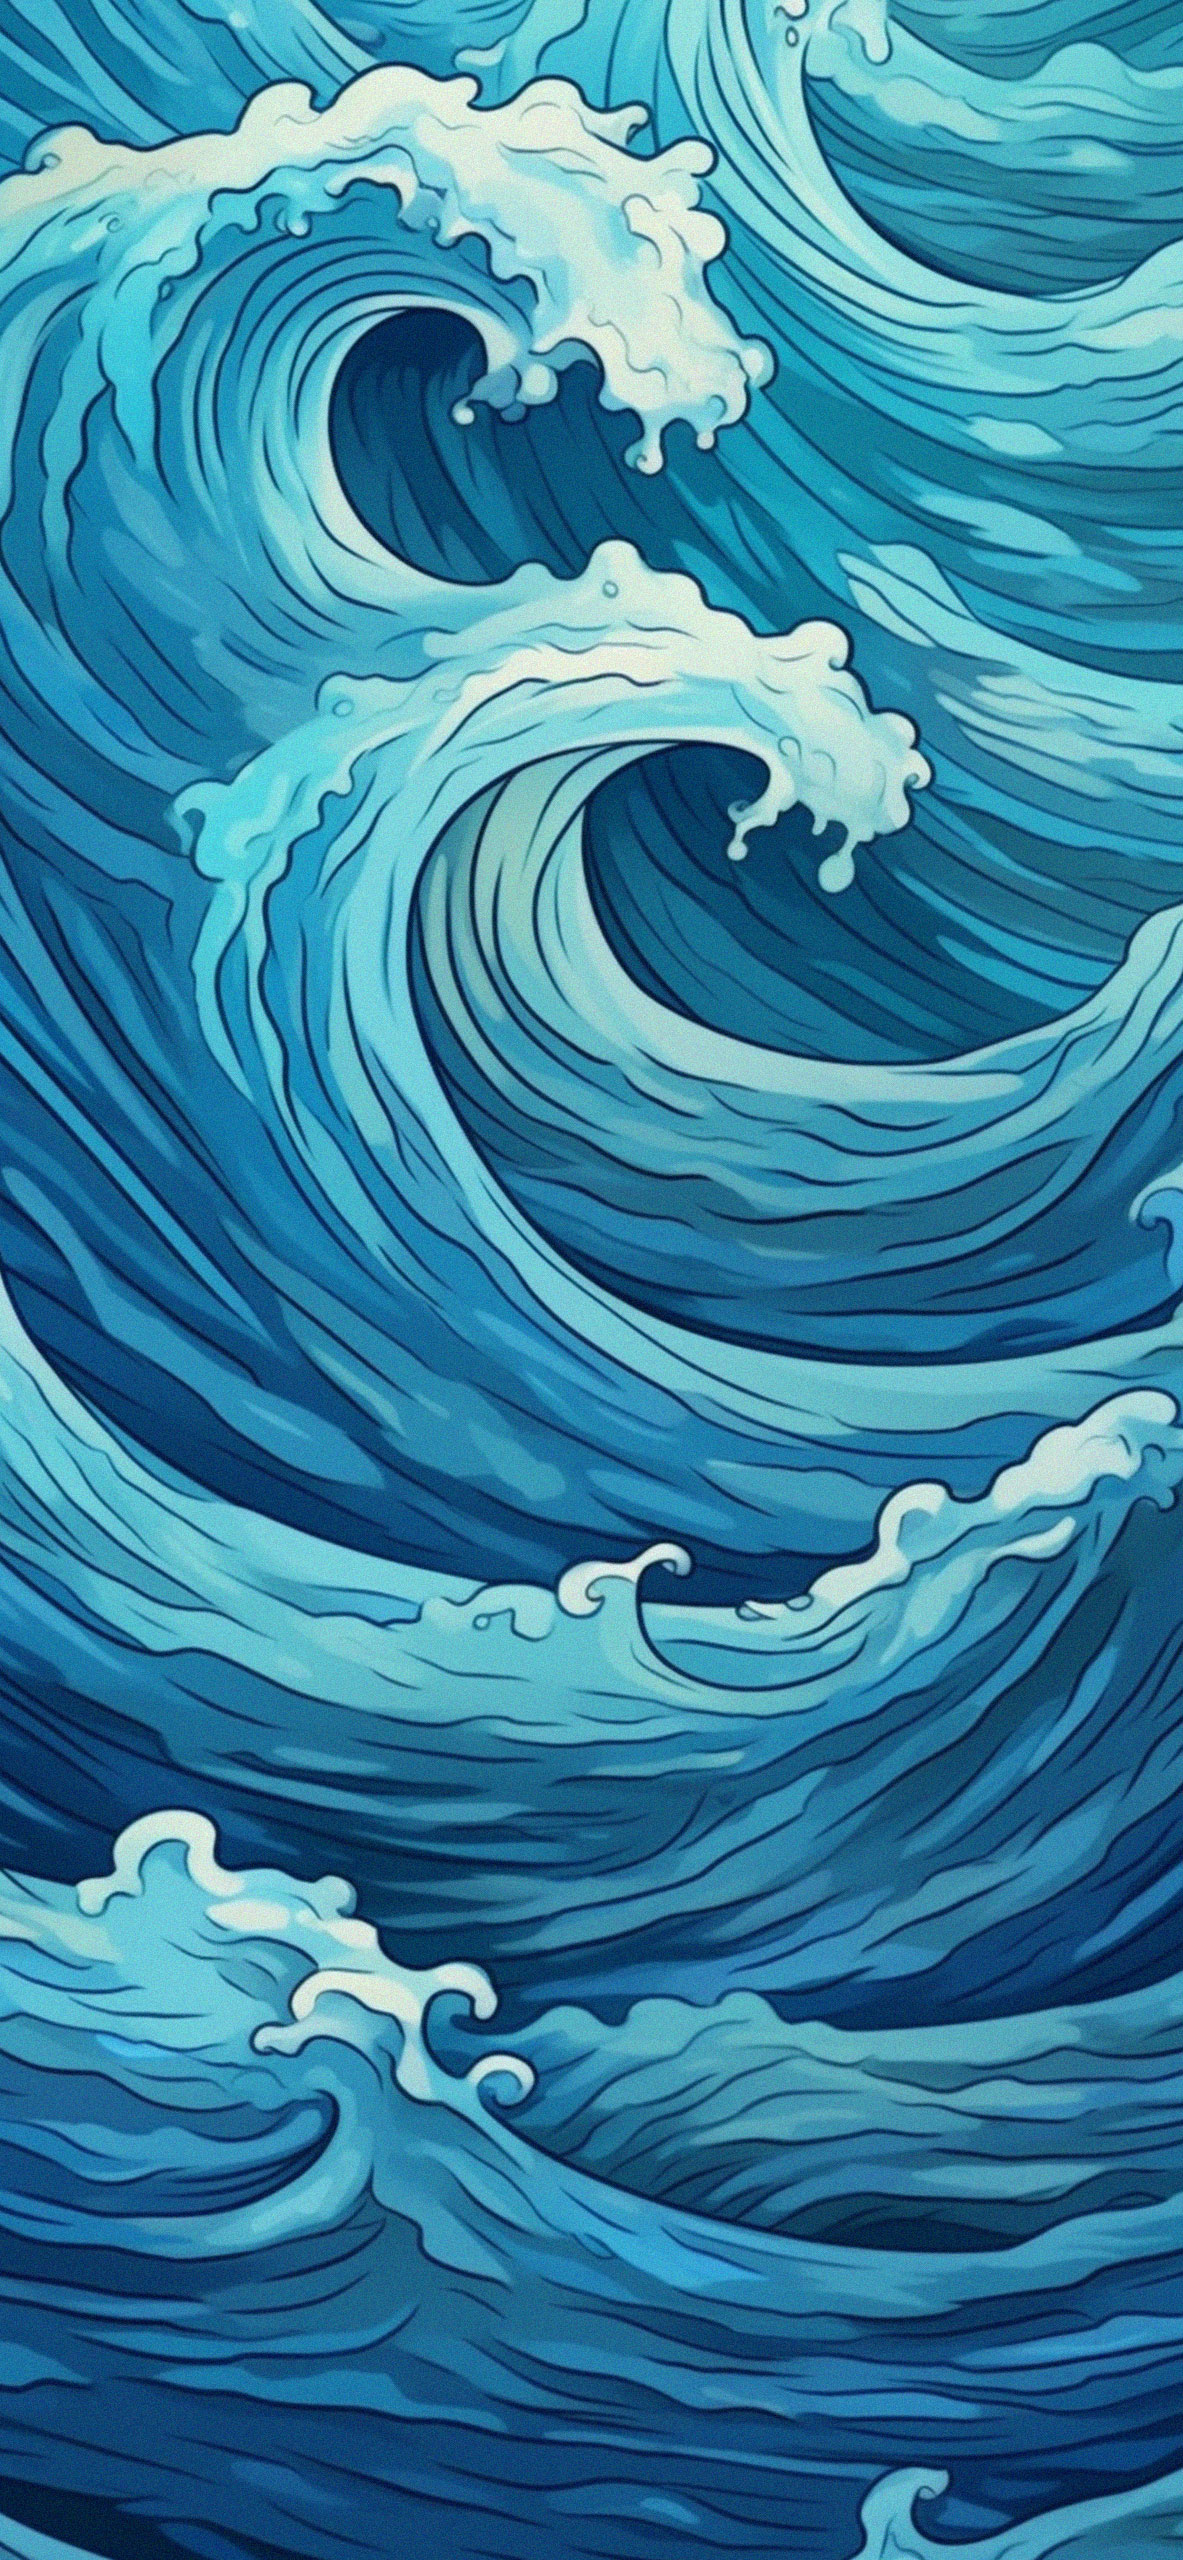 Cool Stormy Waves Wallpapers - Free Aesthetic Waves Wallpapers